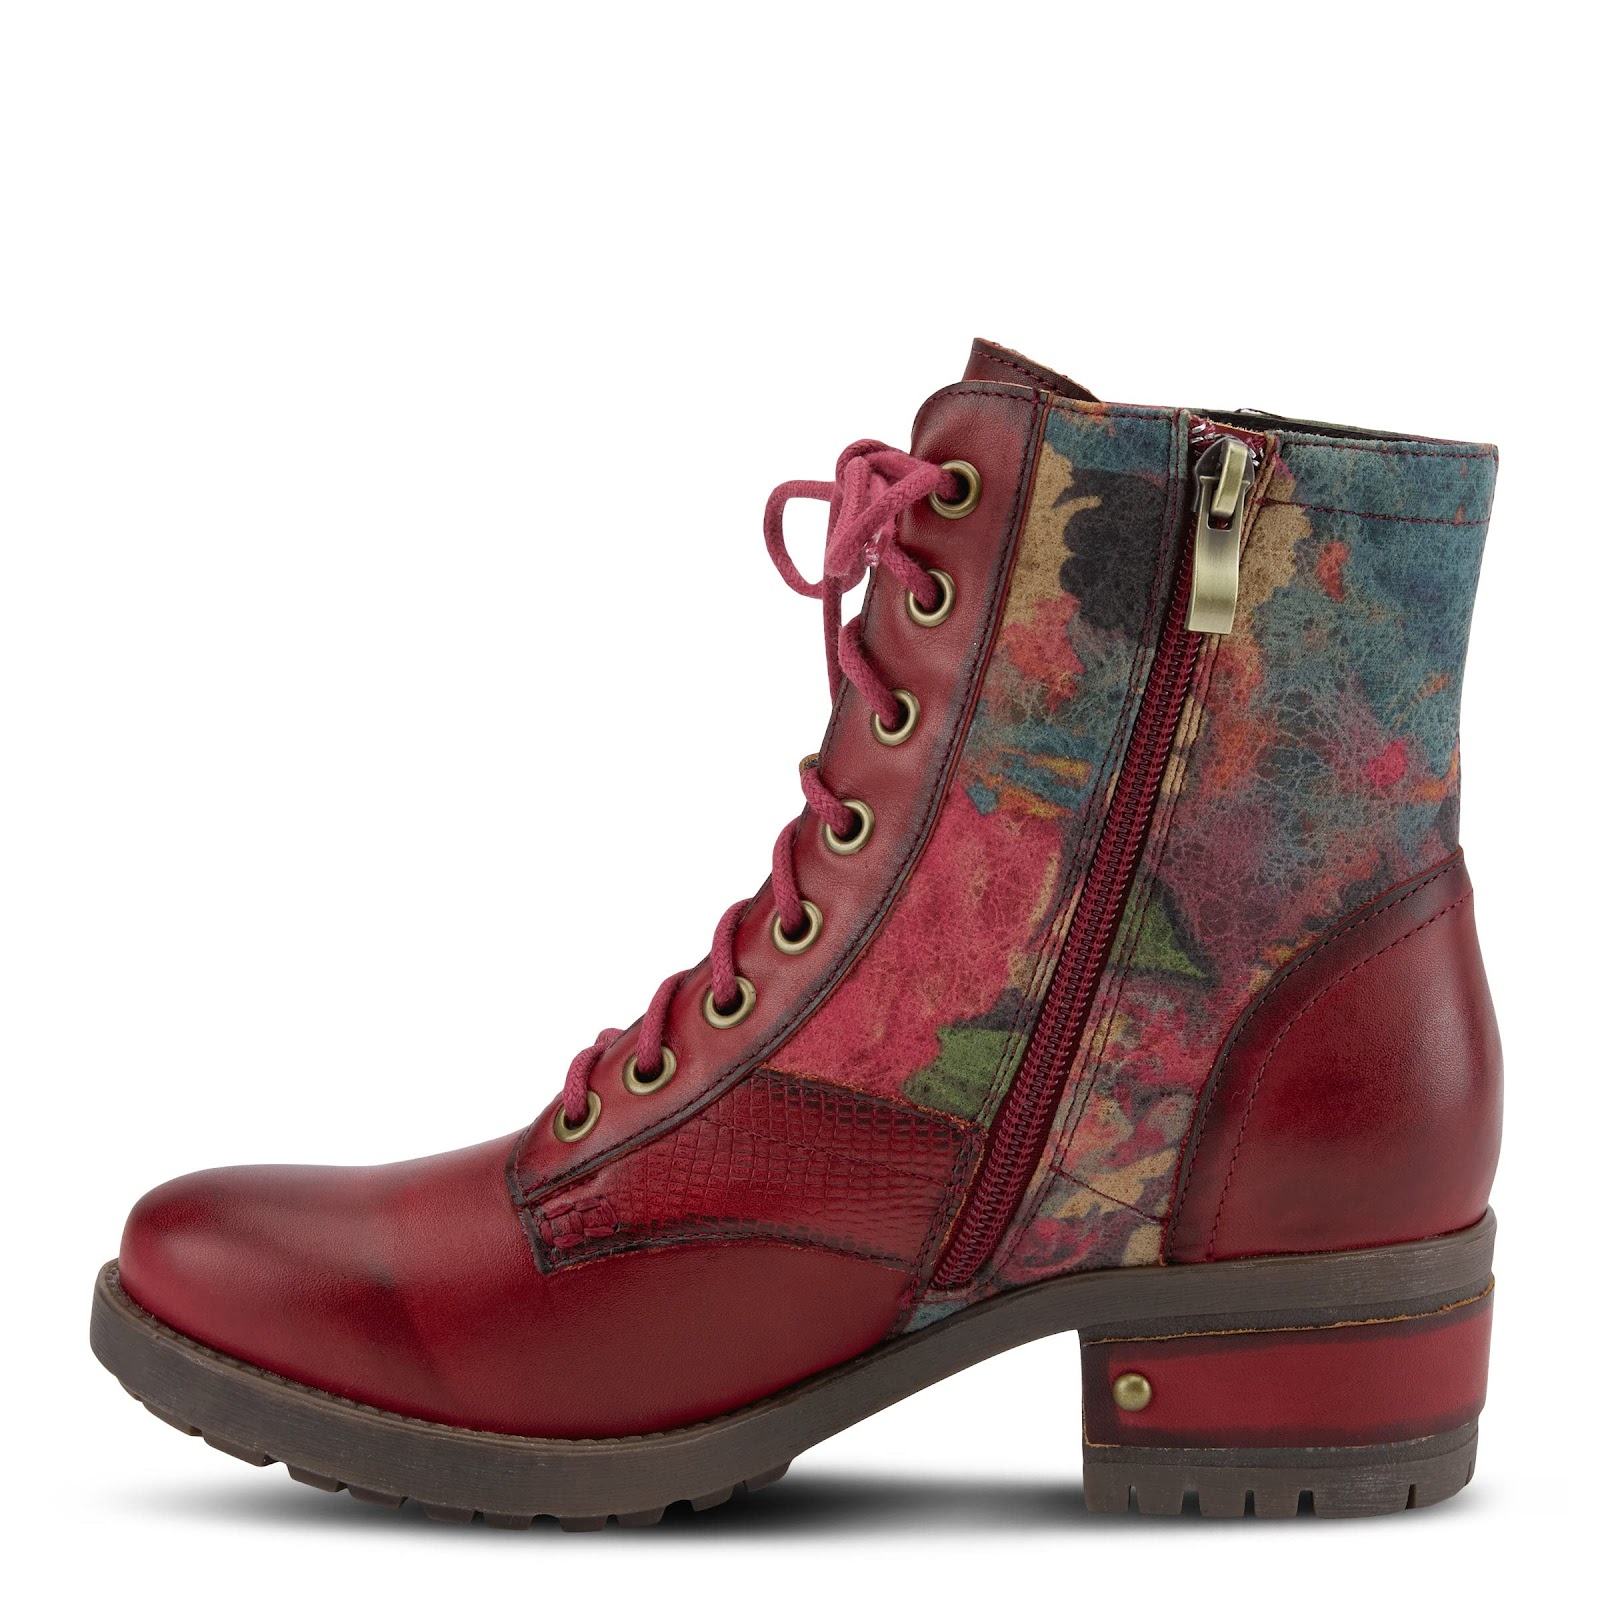 L'ARTISTE Spring Step Women's Marty Boots Red 9